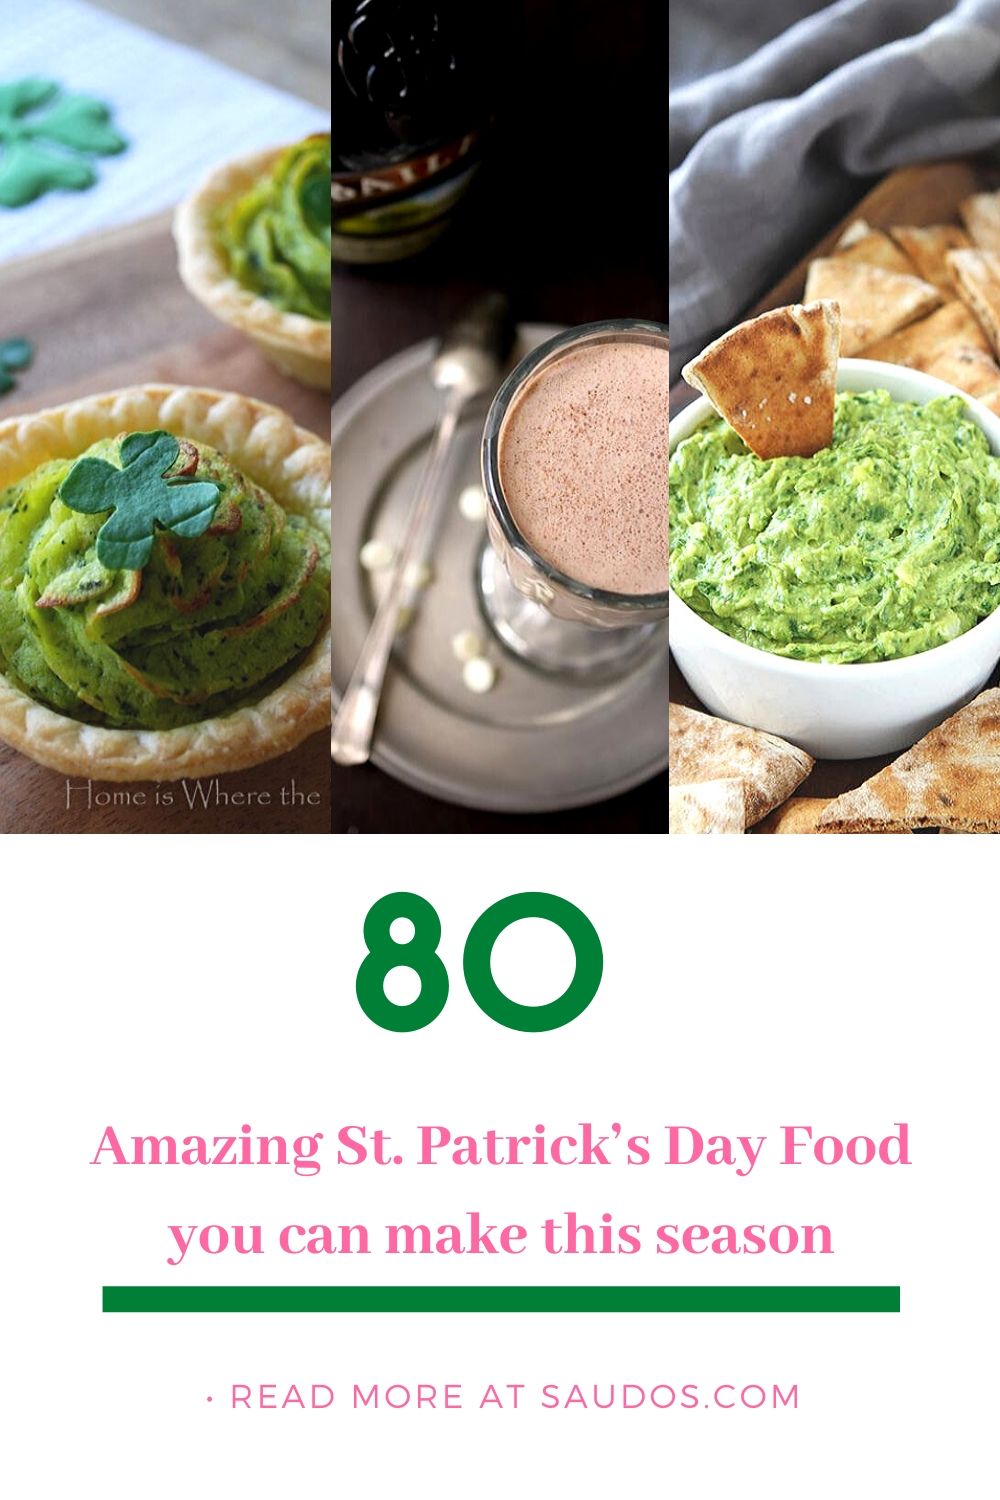 Amazing St. Patrick’s Day Food you can make this season